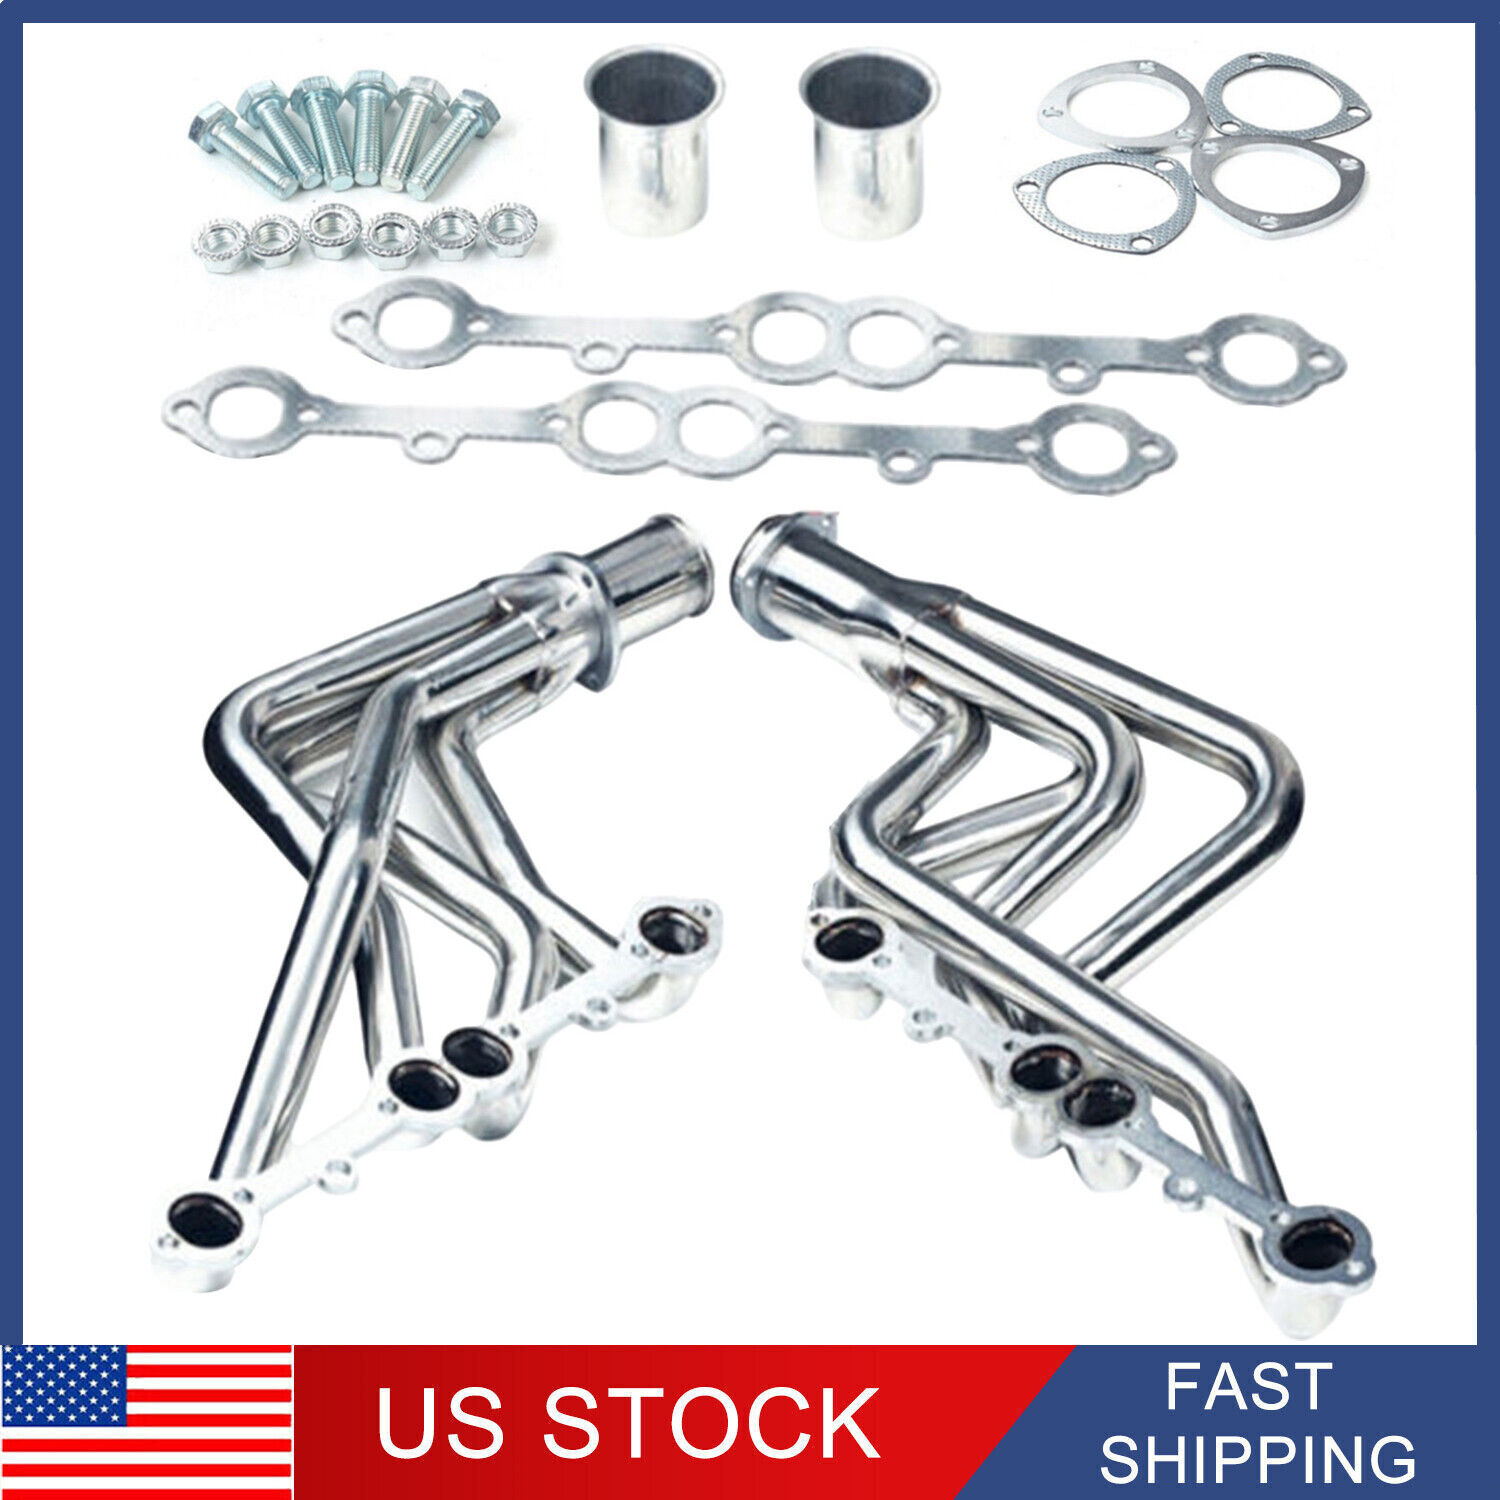 Stainless Steel Headers for 1973-1985 Chevy Truck Blazer Suburban 2wd/4wd